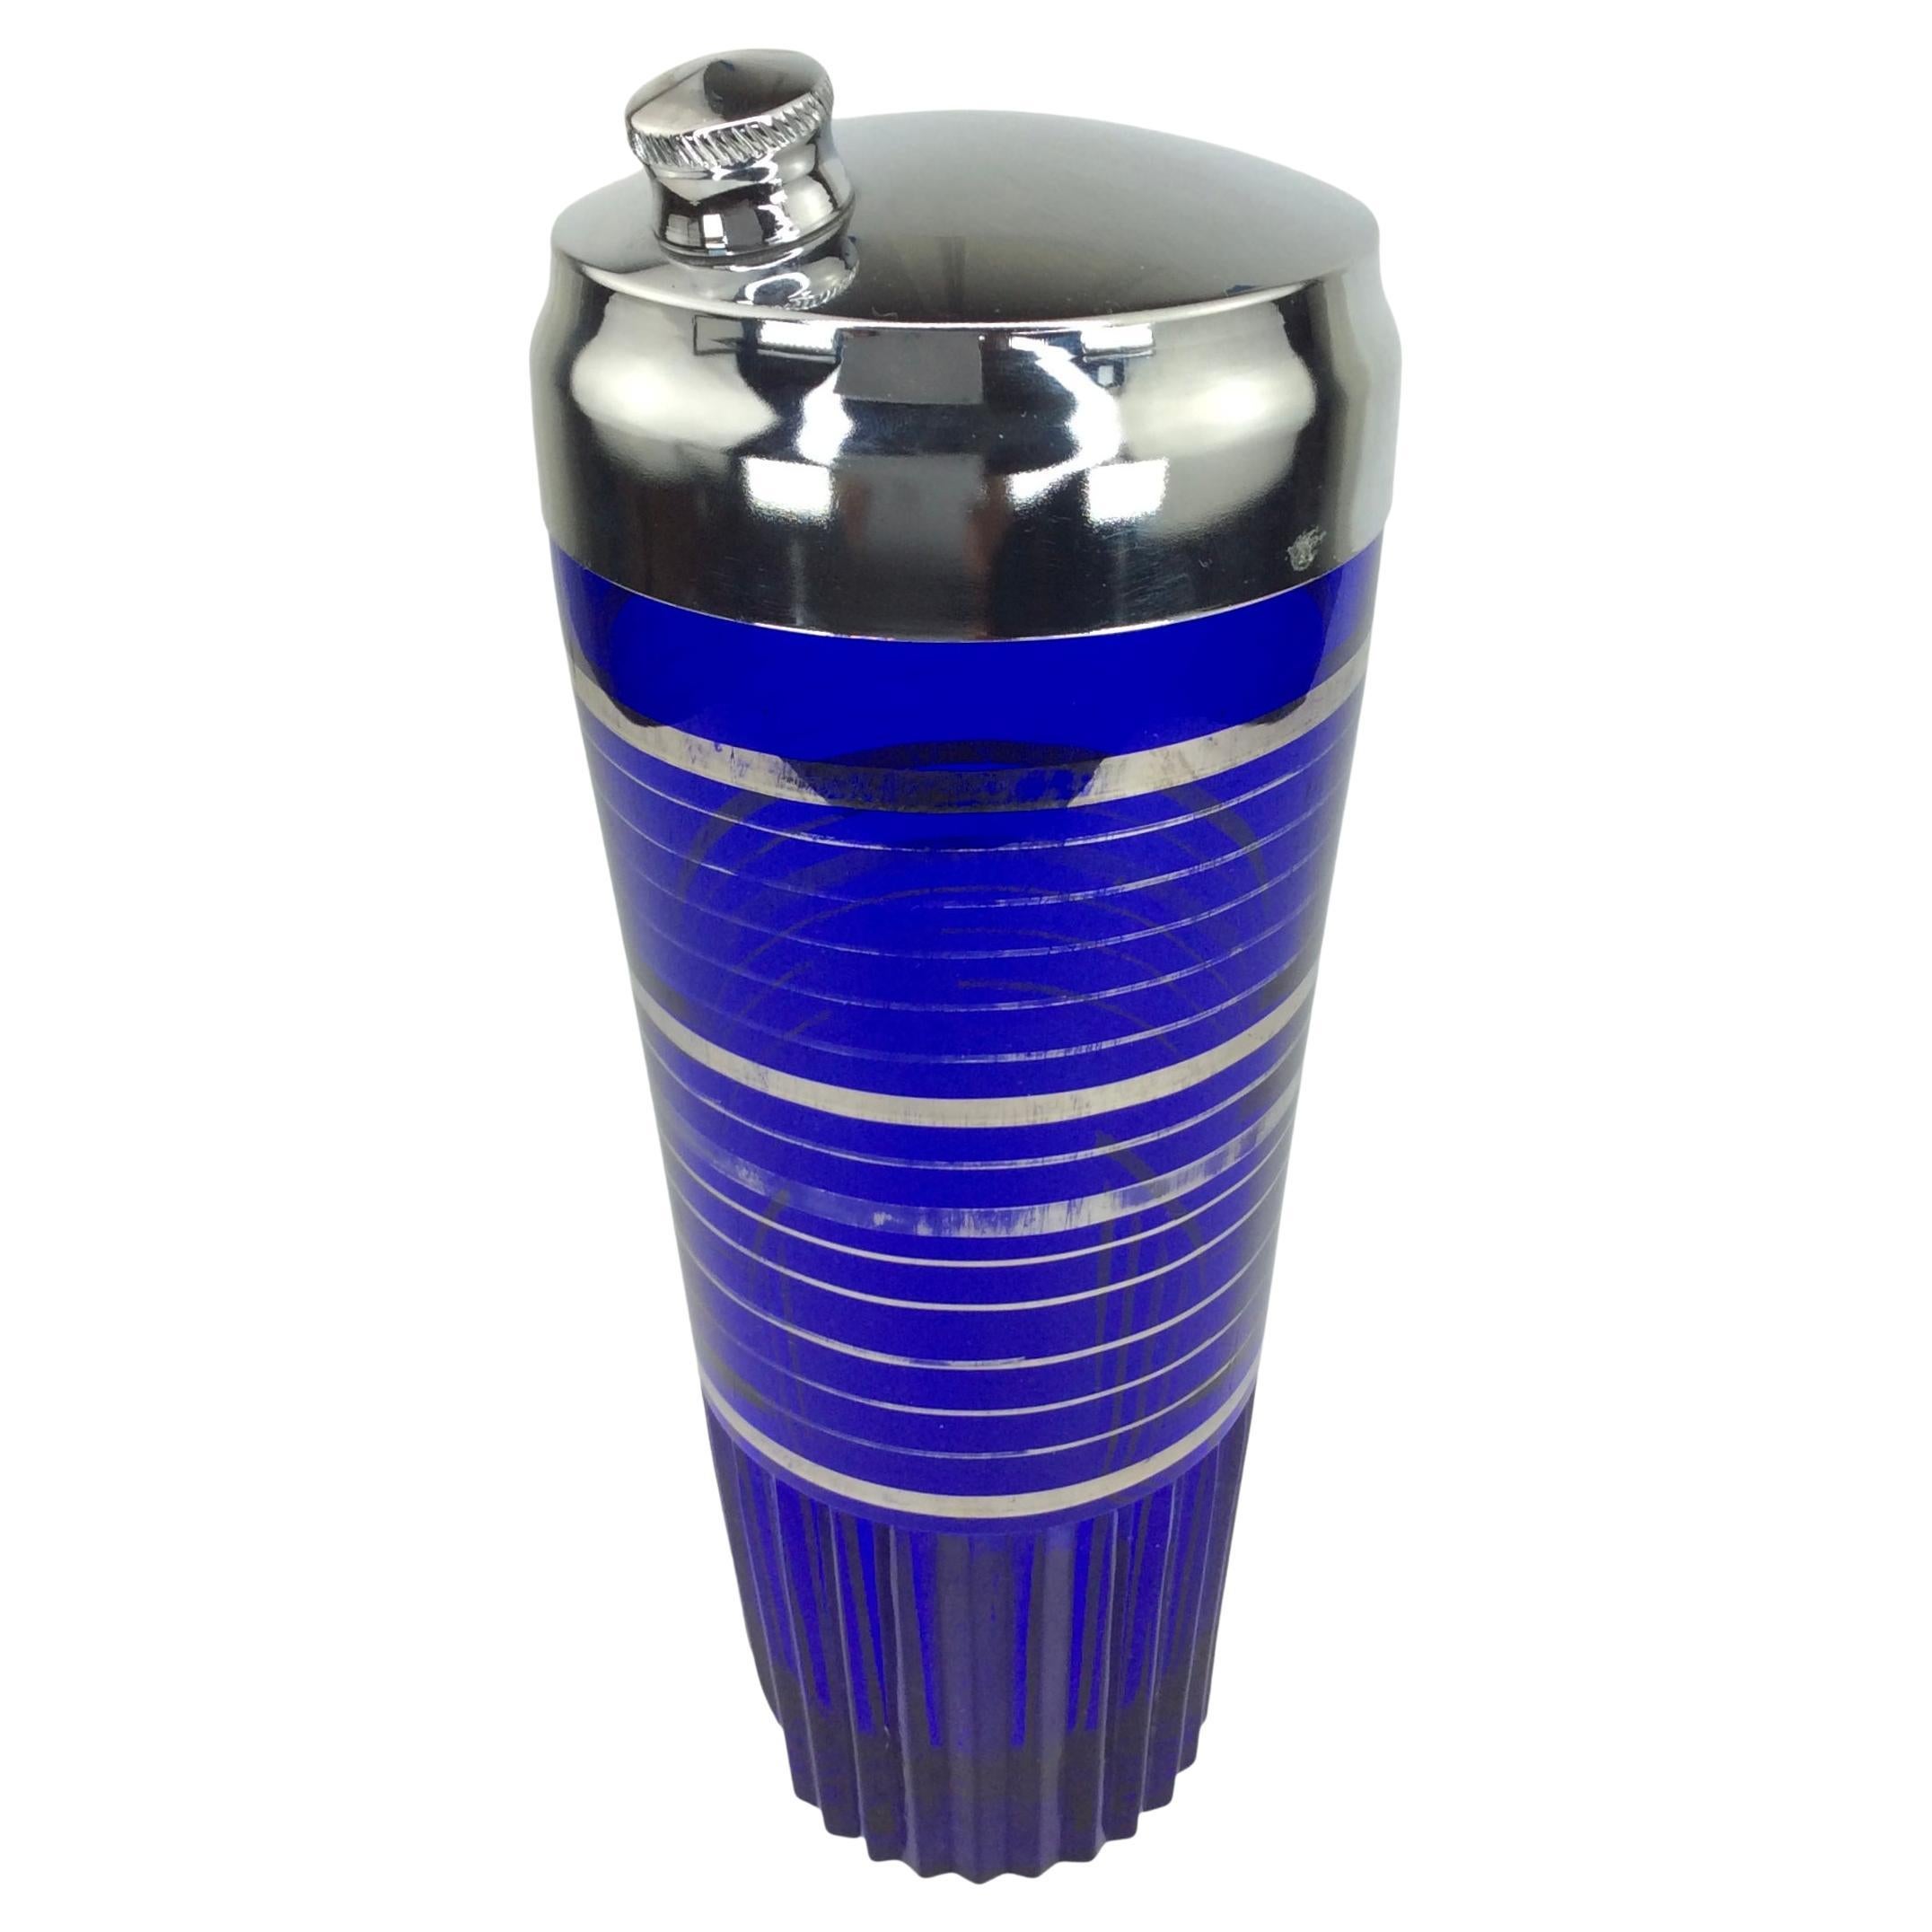 Art Deco Cobalt Blue Cocktail Shaker With Silver Overlay Bands and Fluted Base